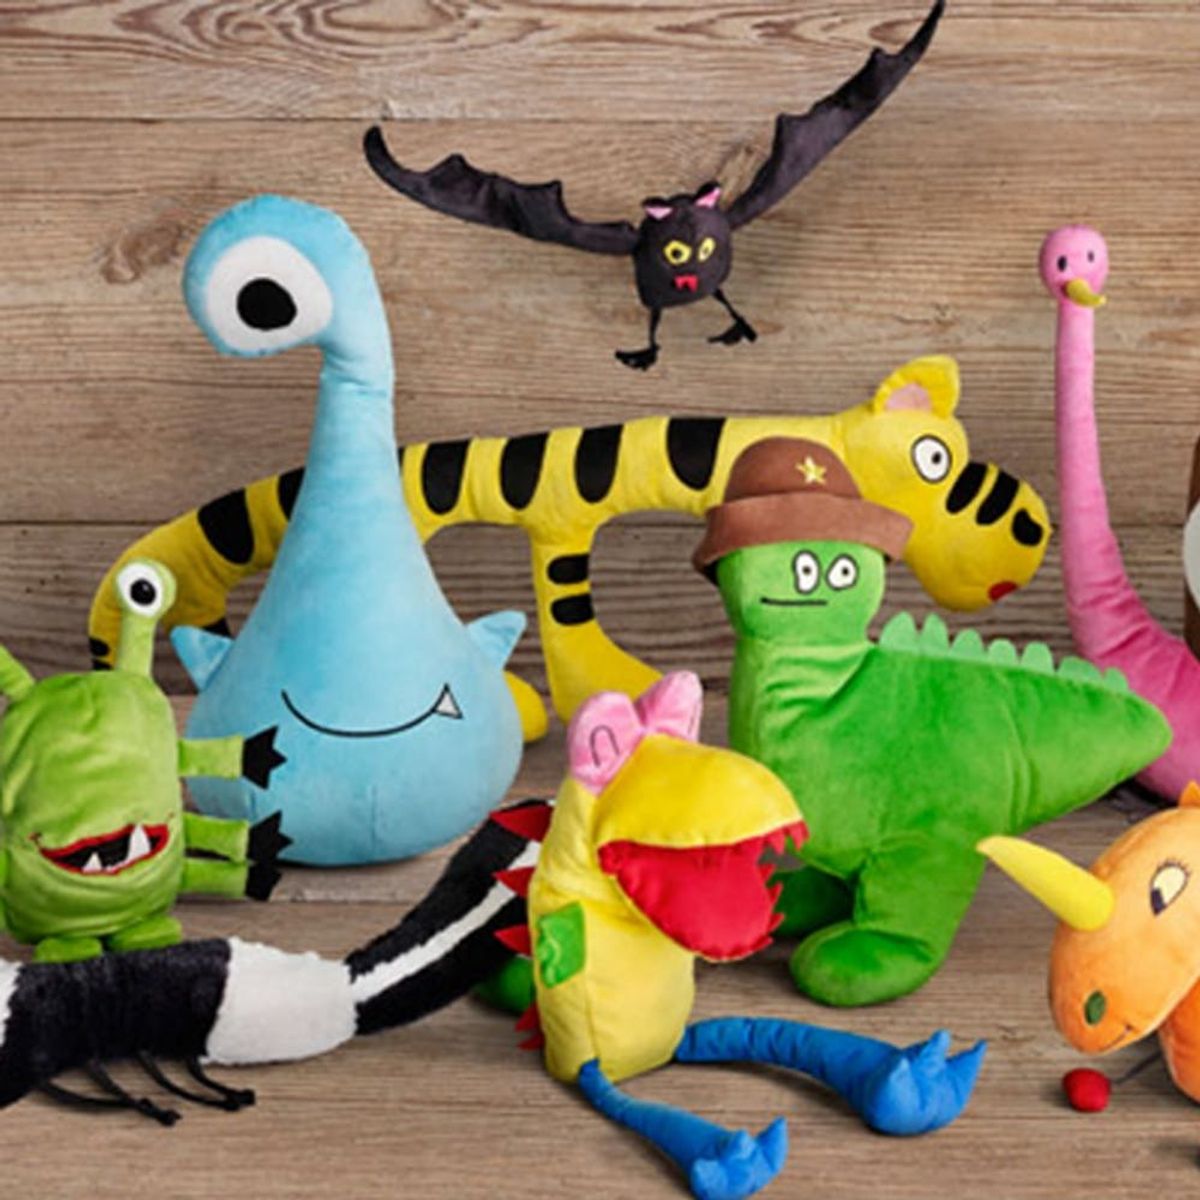 IKEA Turned Kids’ Drawing Into Toys and the Results Are Amazing